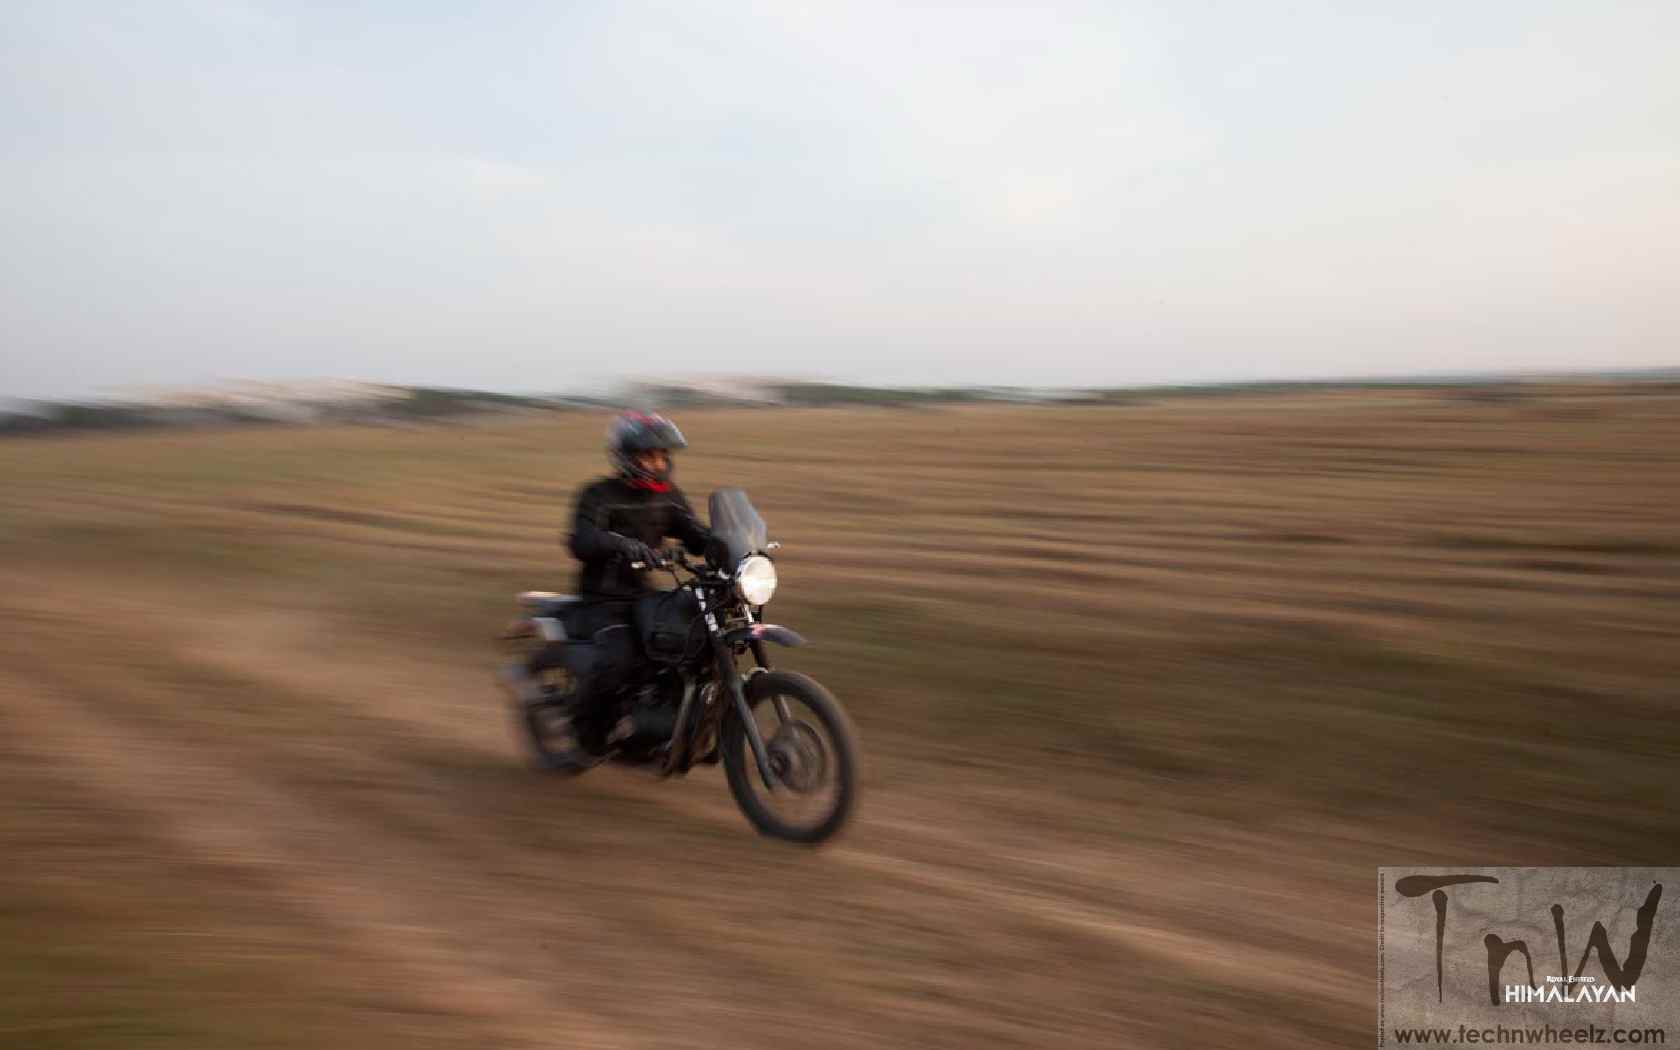 Royal Enfield Himalayan official image out. First impressions